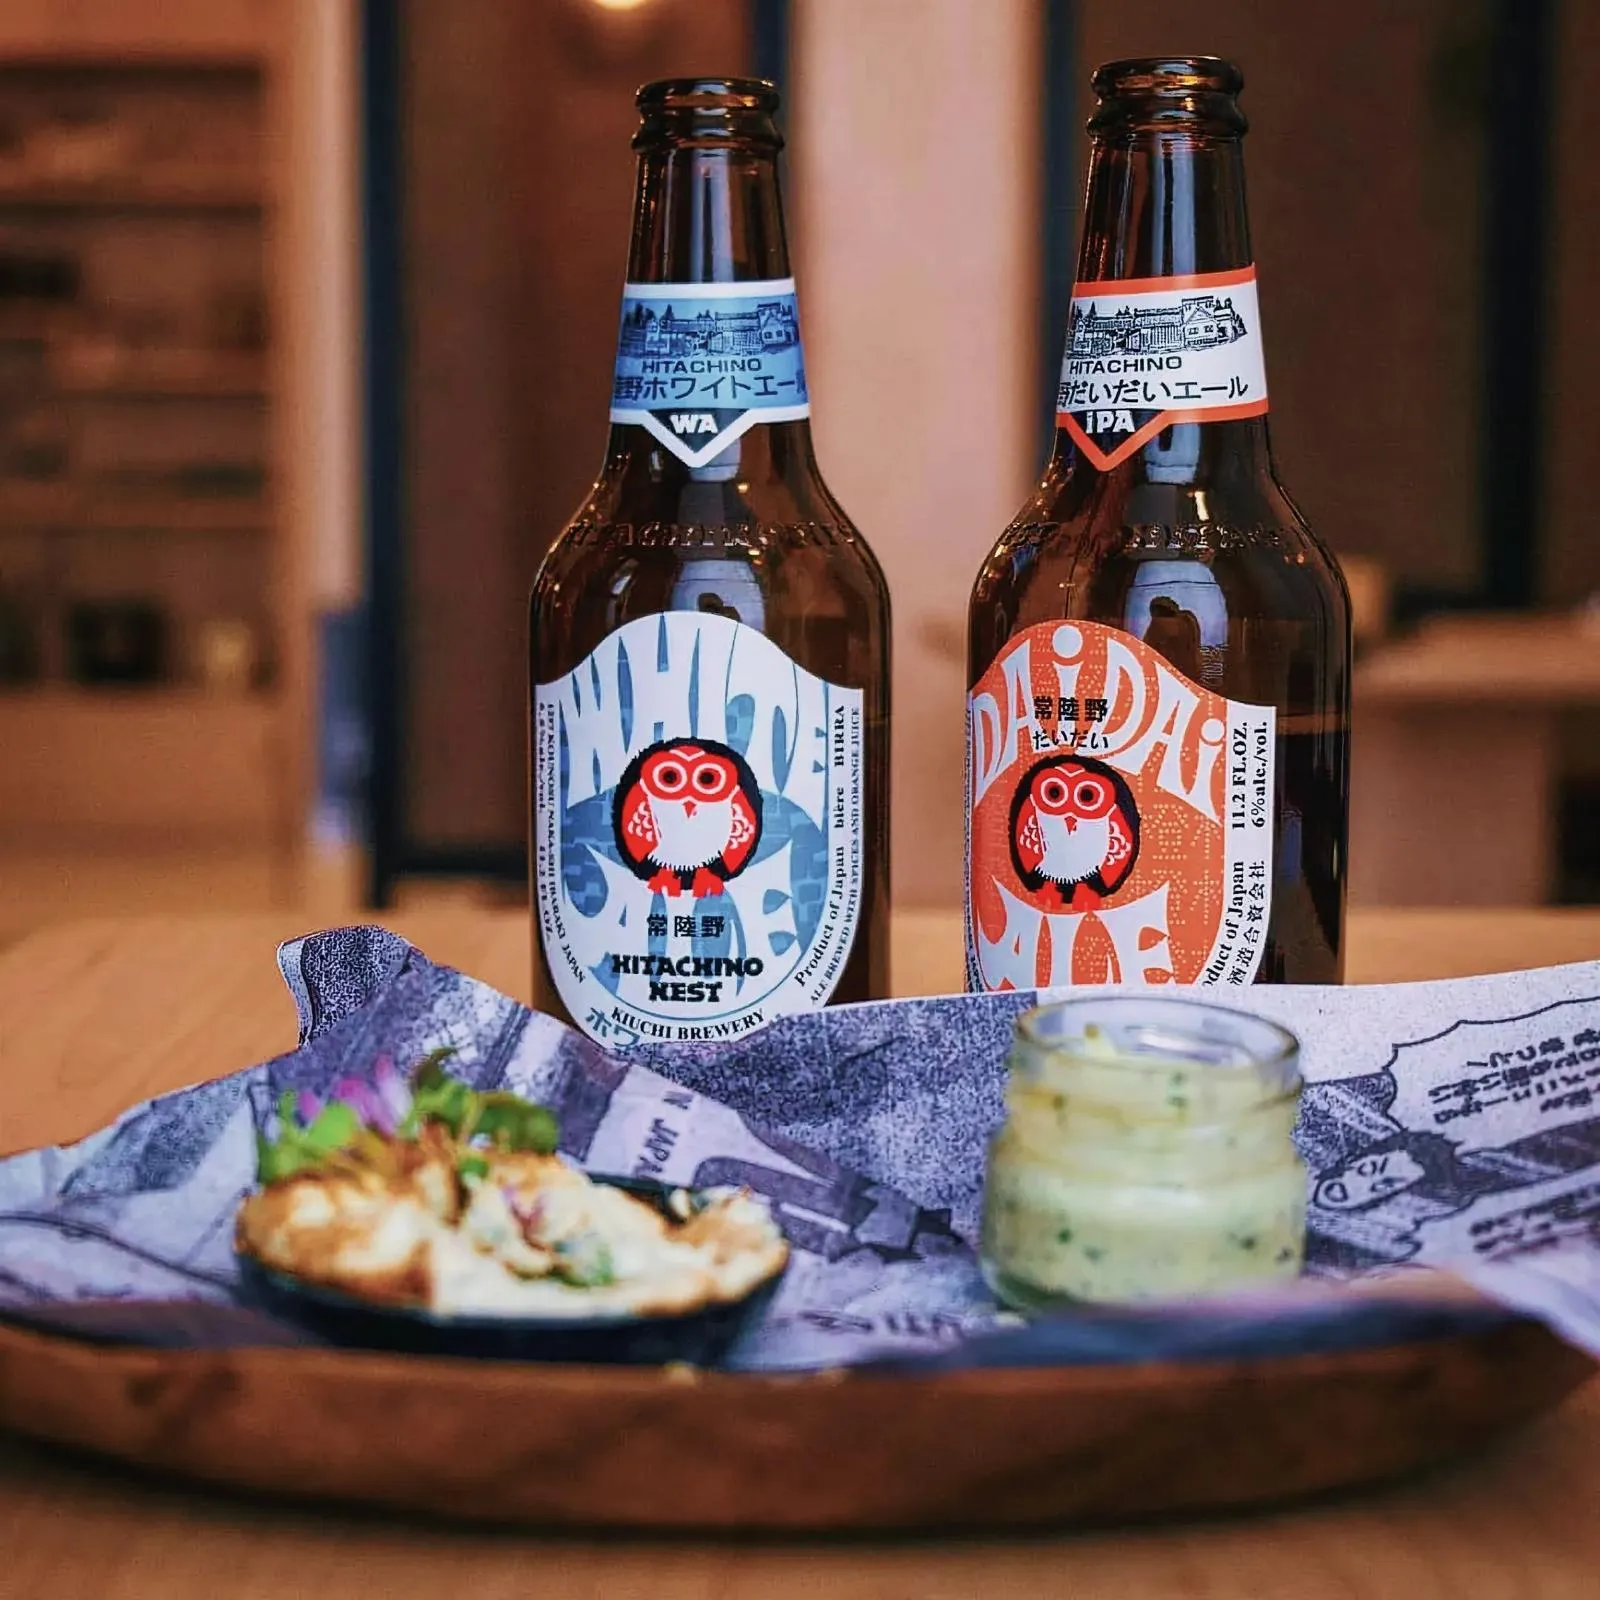 Close-up of Hitachino Nest Beer bottles and plate of food on a wooden table.